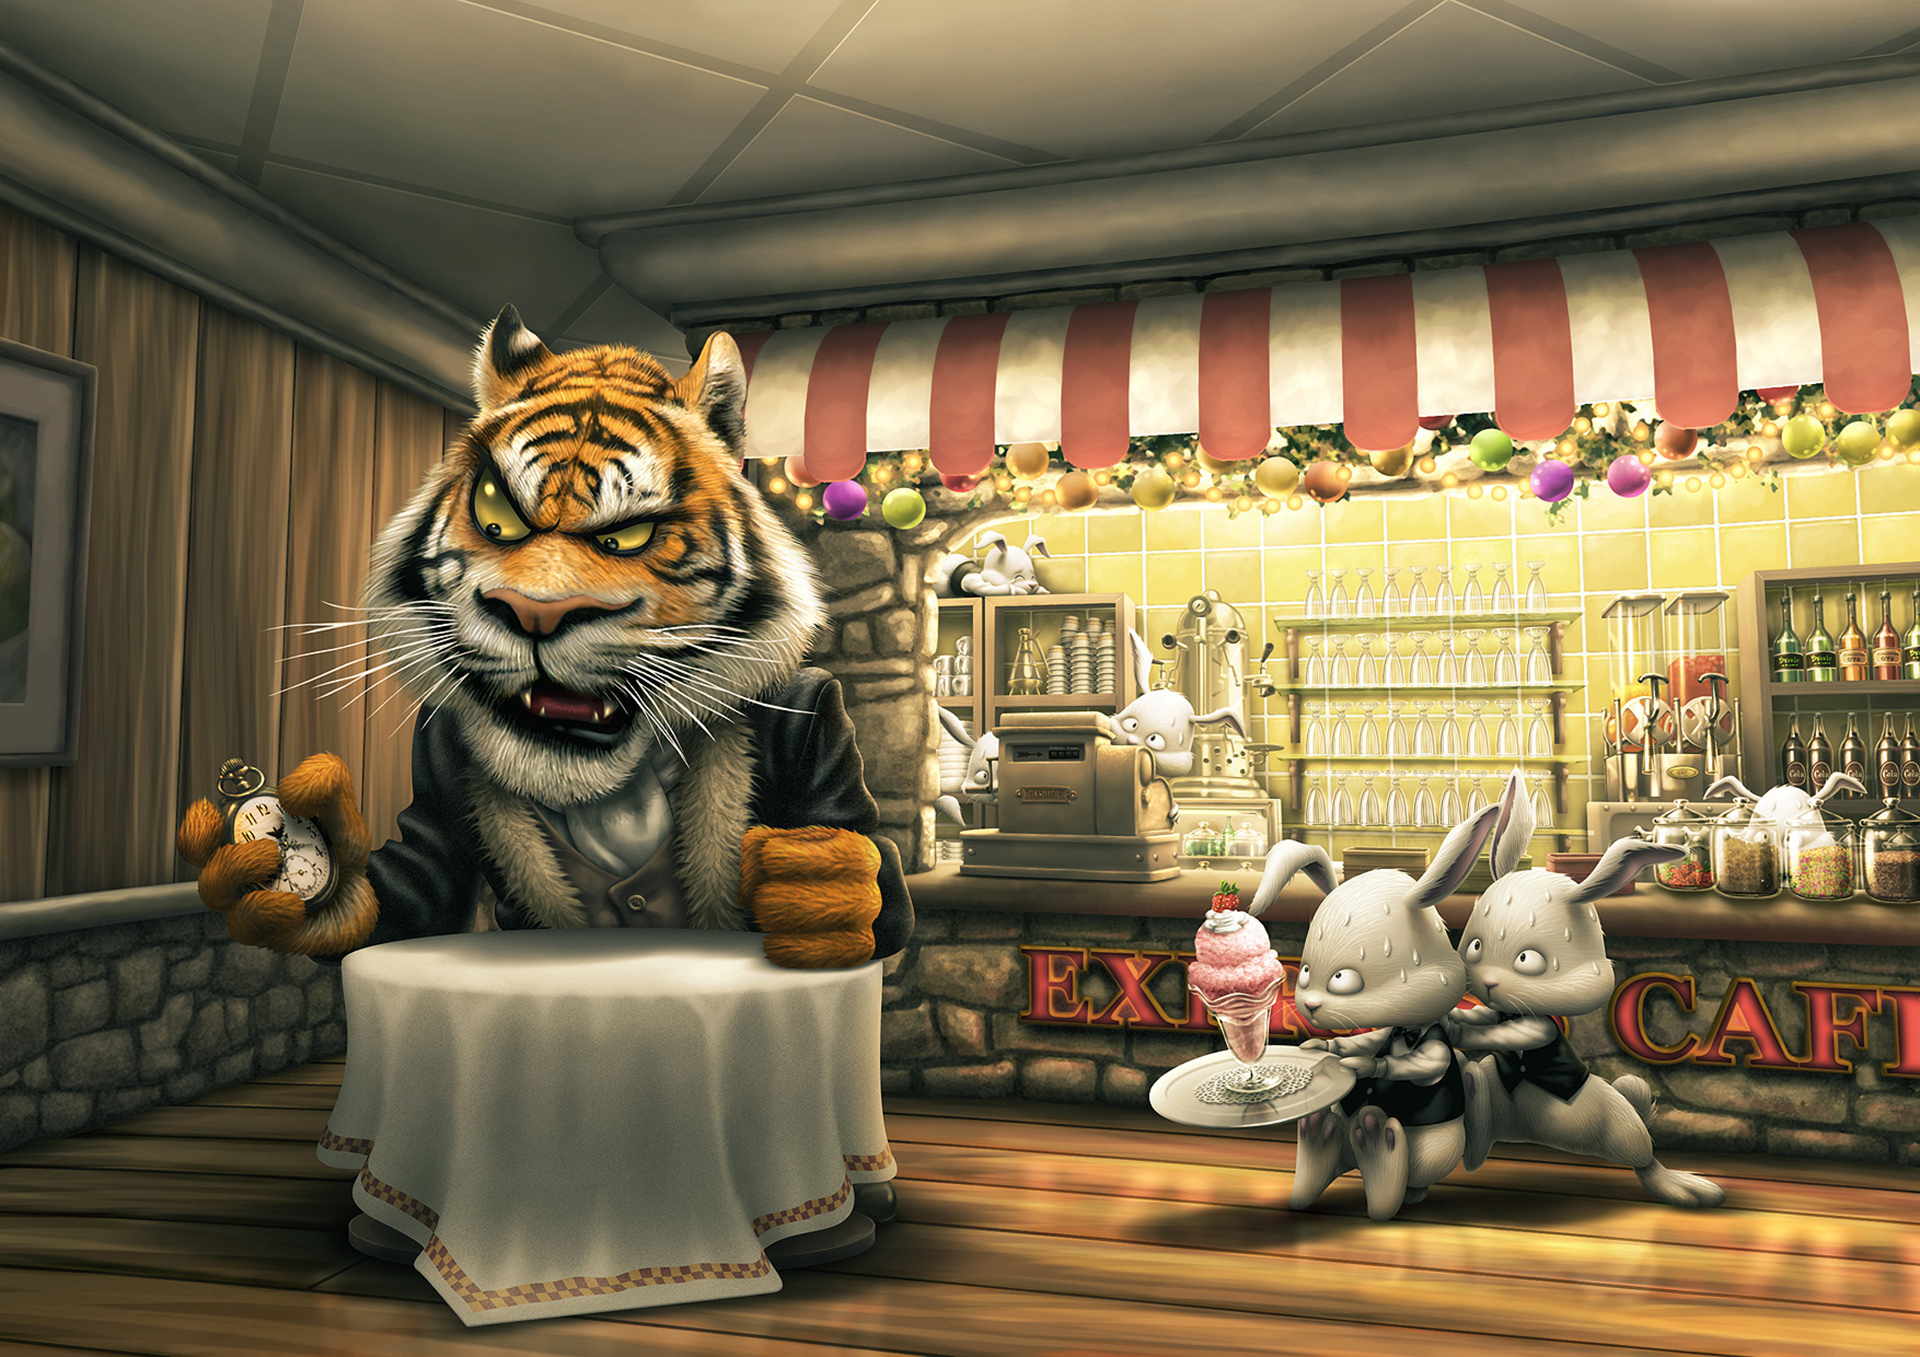 tiger, Rabbit, The, Customer, A, Cafe, A, Table, Order, Ice, Cream, Watches, Cash, Waiters, Late Wallpaper